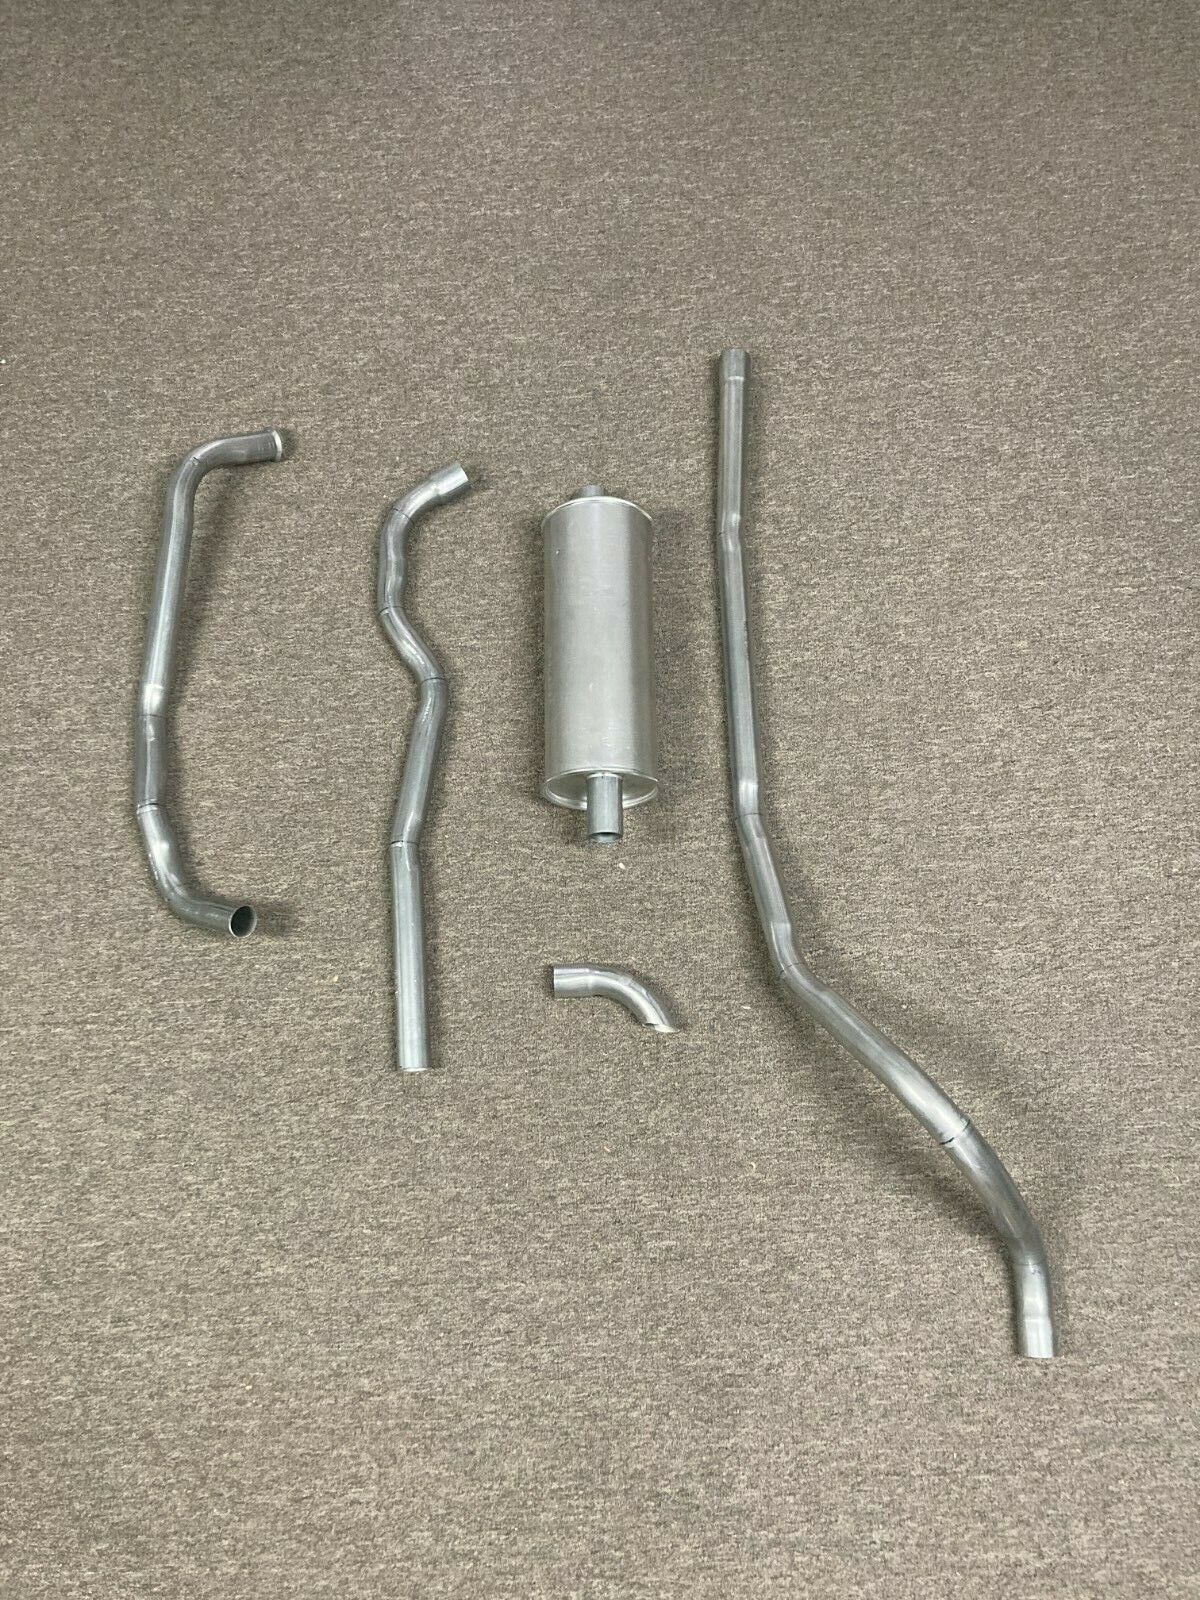 1963-1964 Ford Falcon Hardtop Complete 6 Cylinder Stock Exhaust System 